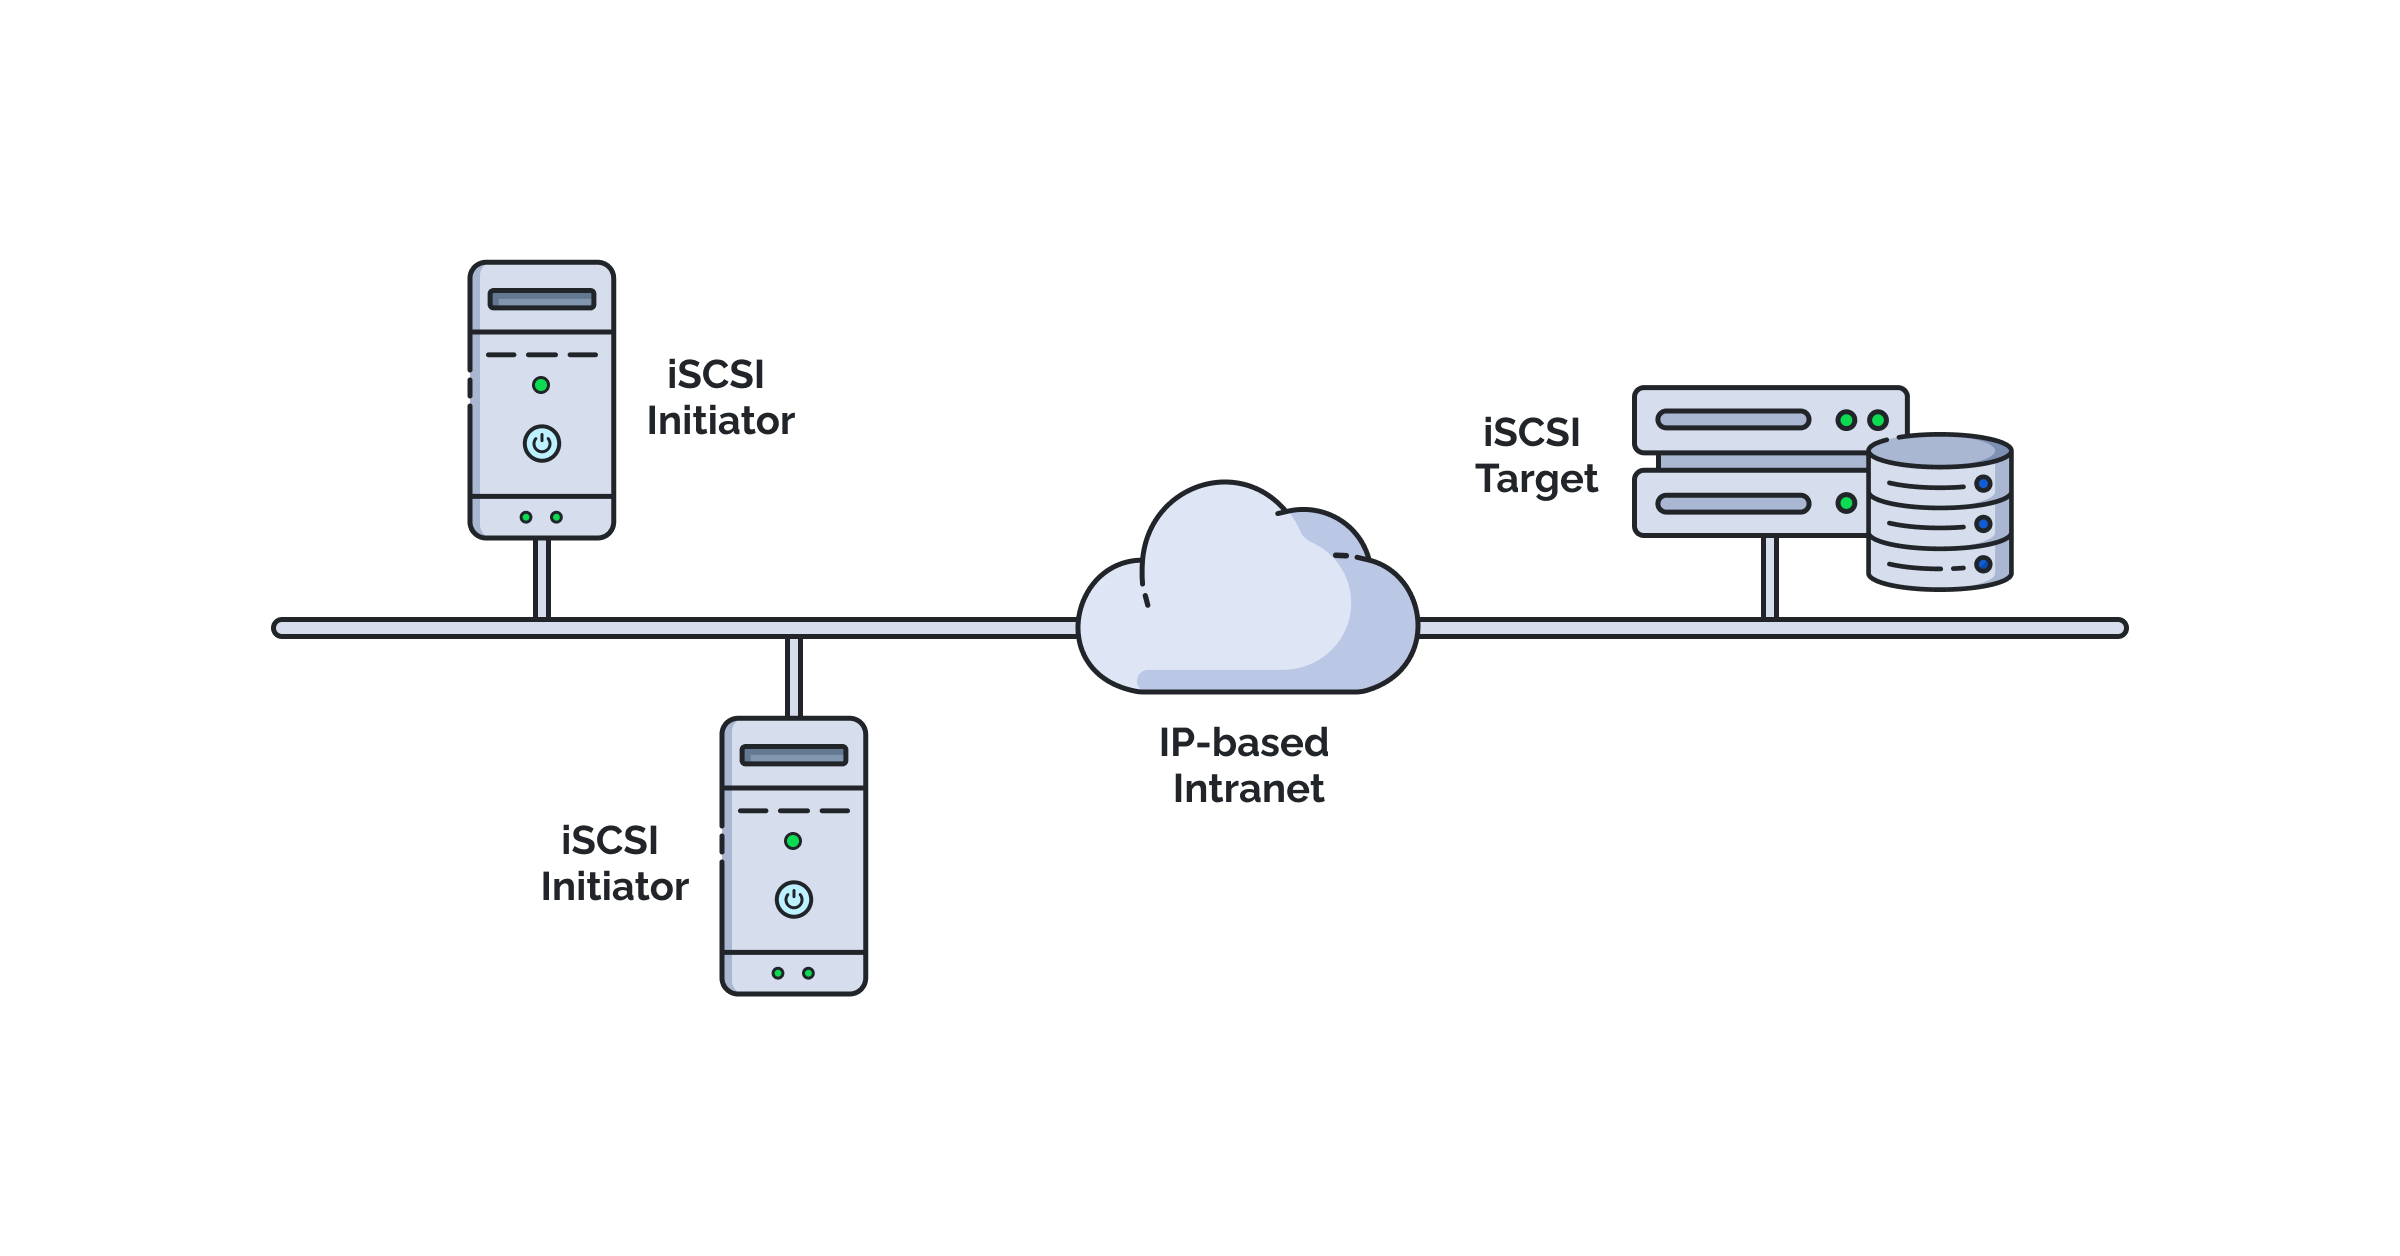 The iSCSI protocol essentially enables the creation of Storage Area Networks (SANs) on existing IP networks